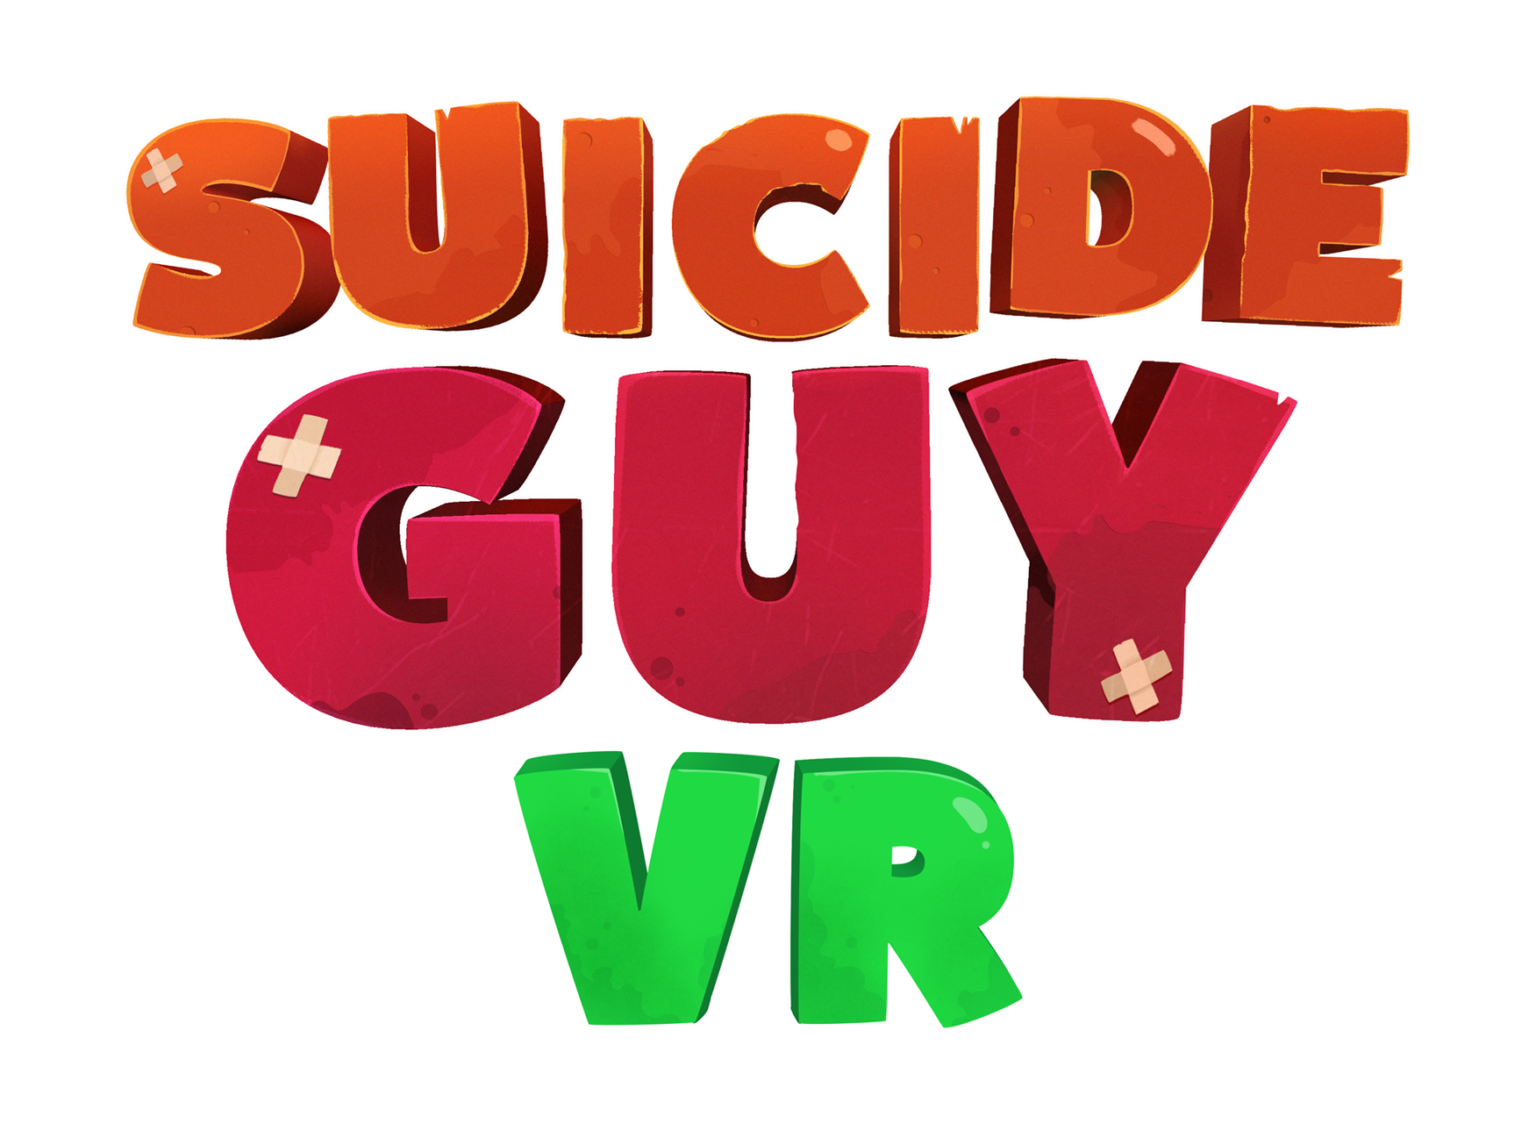 Suicide guy steam фото 82